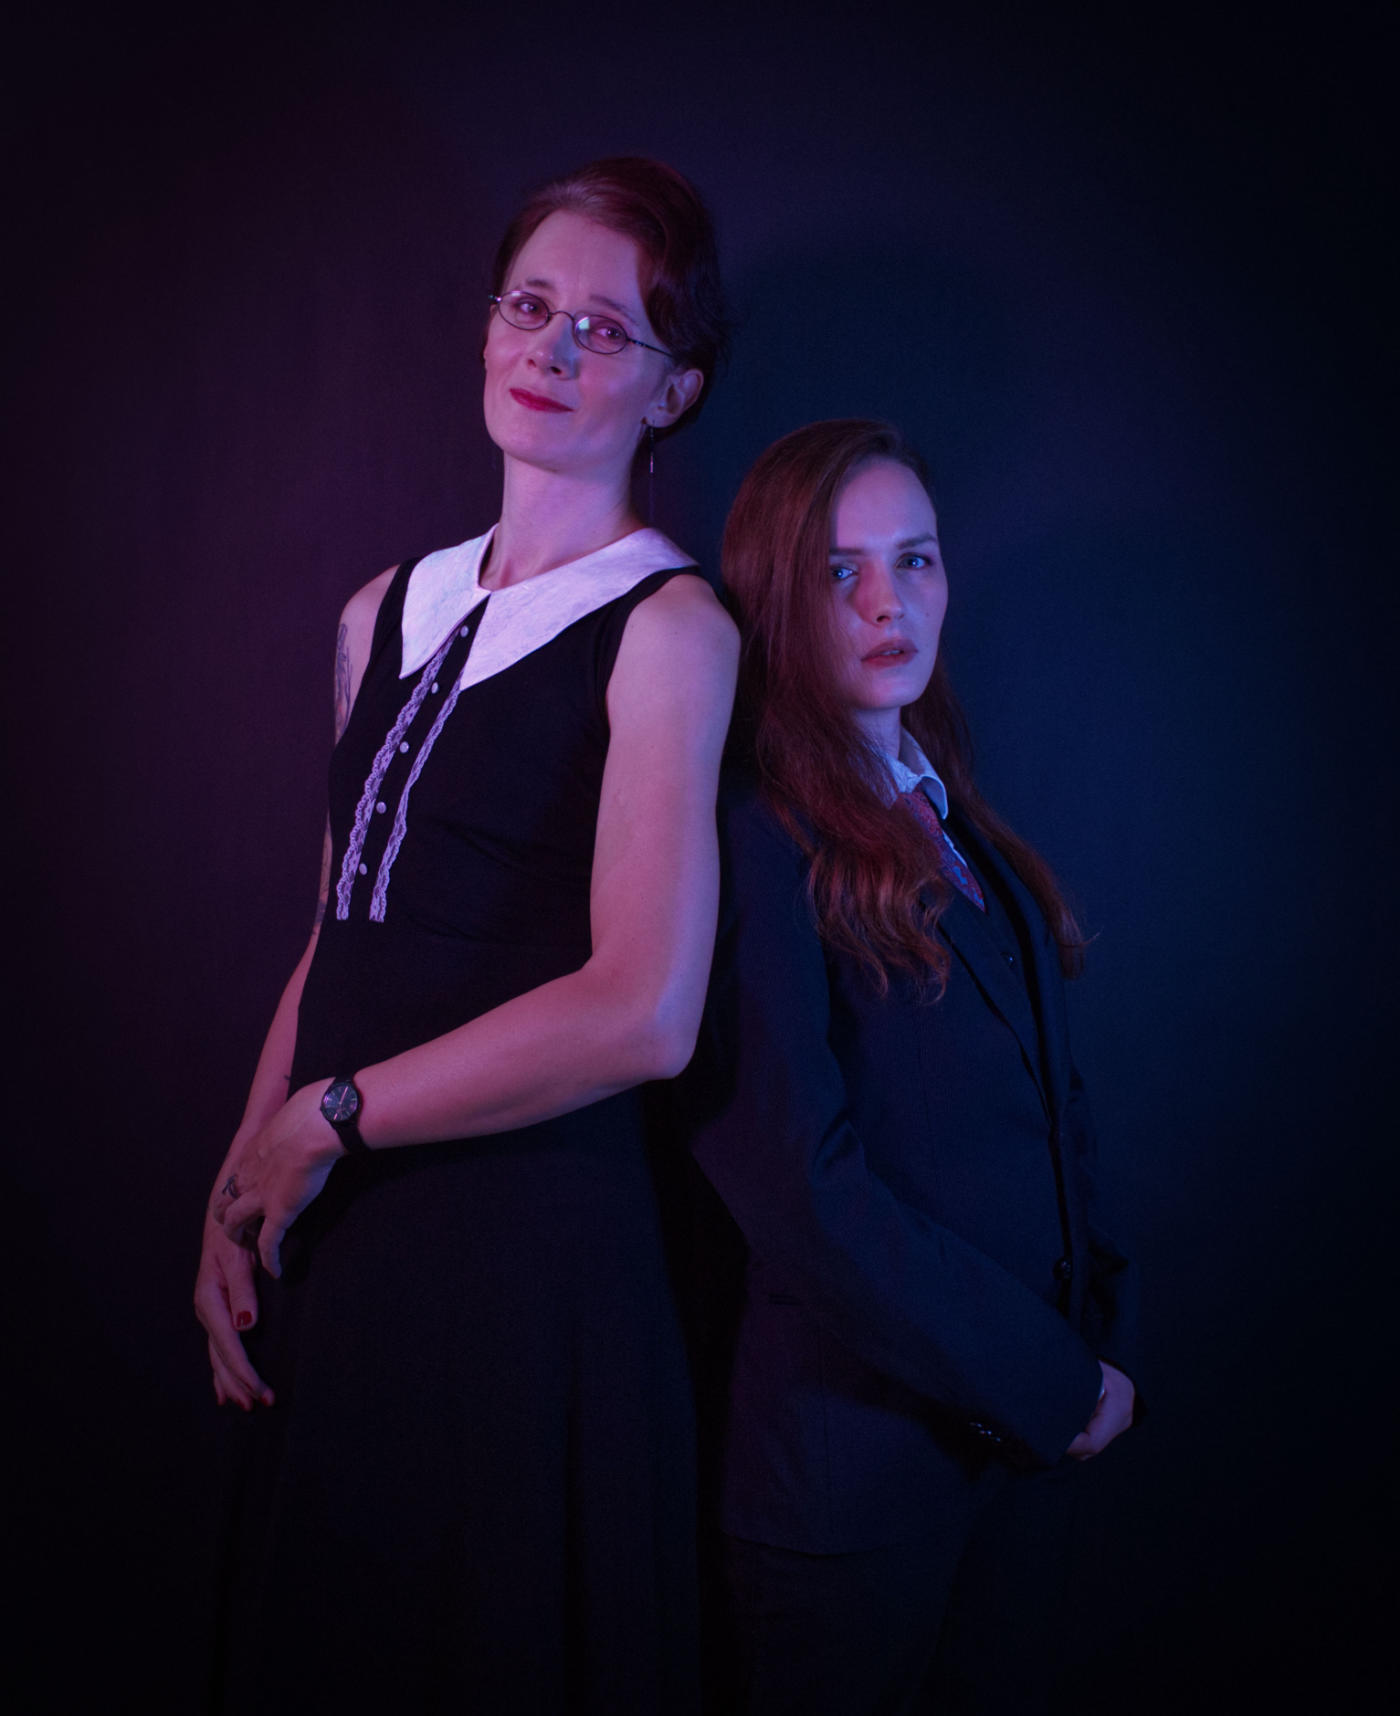 Two women in front of a black background leaning back to back, the tall one on the left wearing a black dress with a white collar and short dark-red hair, the shorter one on the right wearing a black suit with a red tie and long red hair. Blue/purple lighting from the sides.